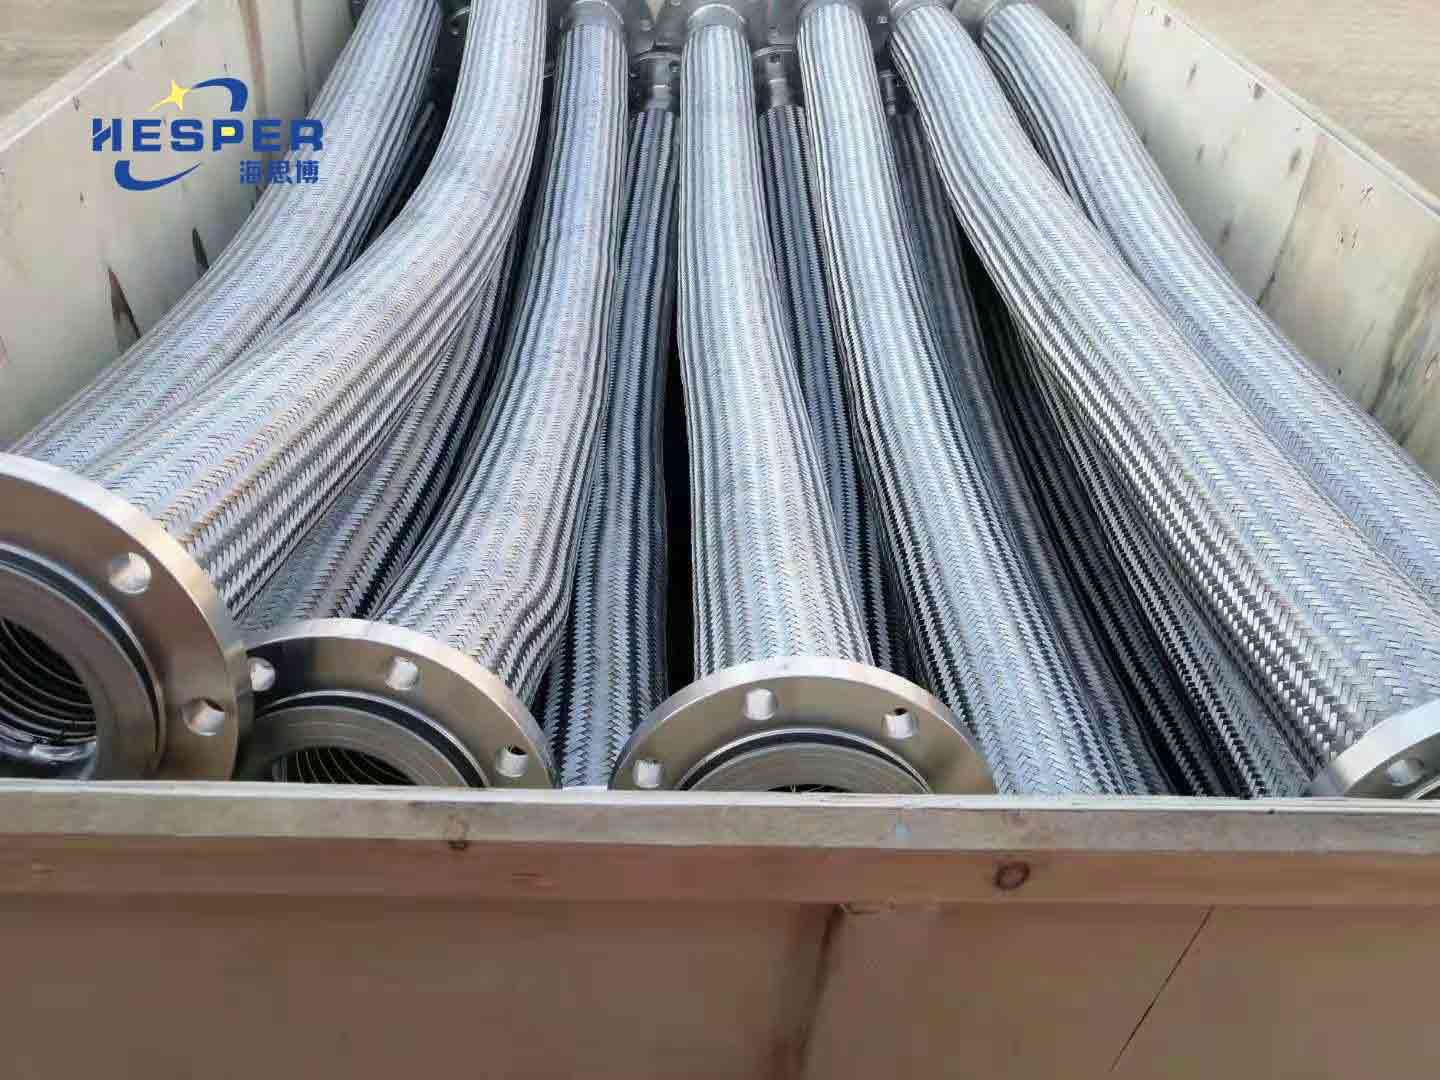 Differences between bellow expansion joints and flexible metal hoses